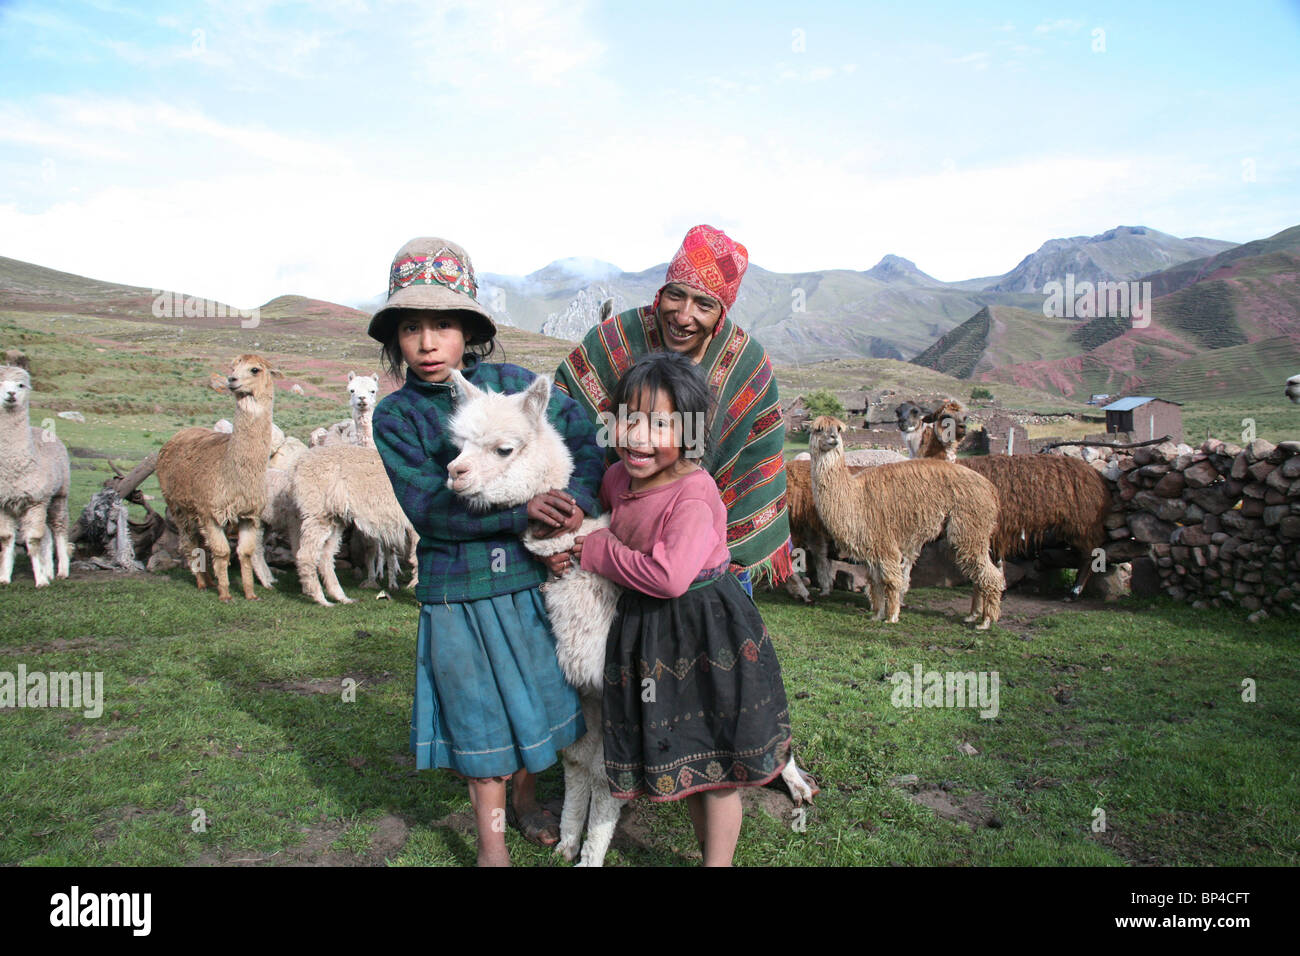 An Alpaca farmer with his family in the Andean highlands, Palccoyo, Canchis, Peru, South America Stock Photo